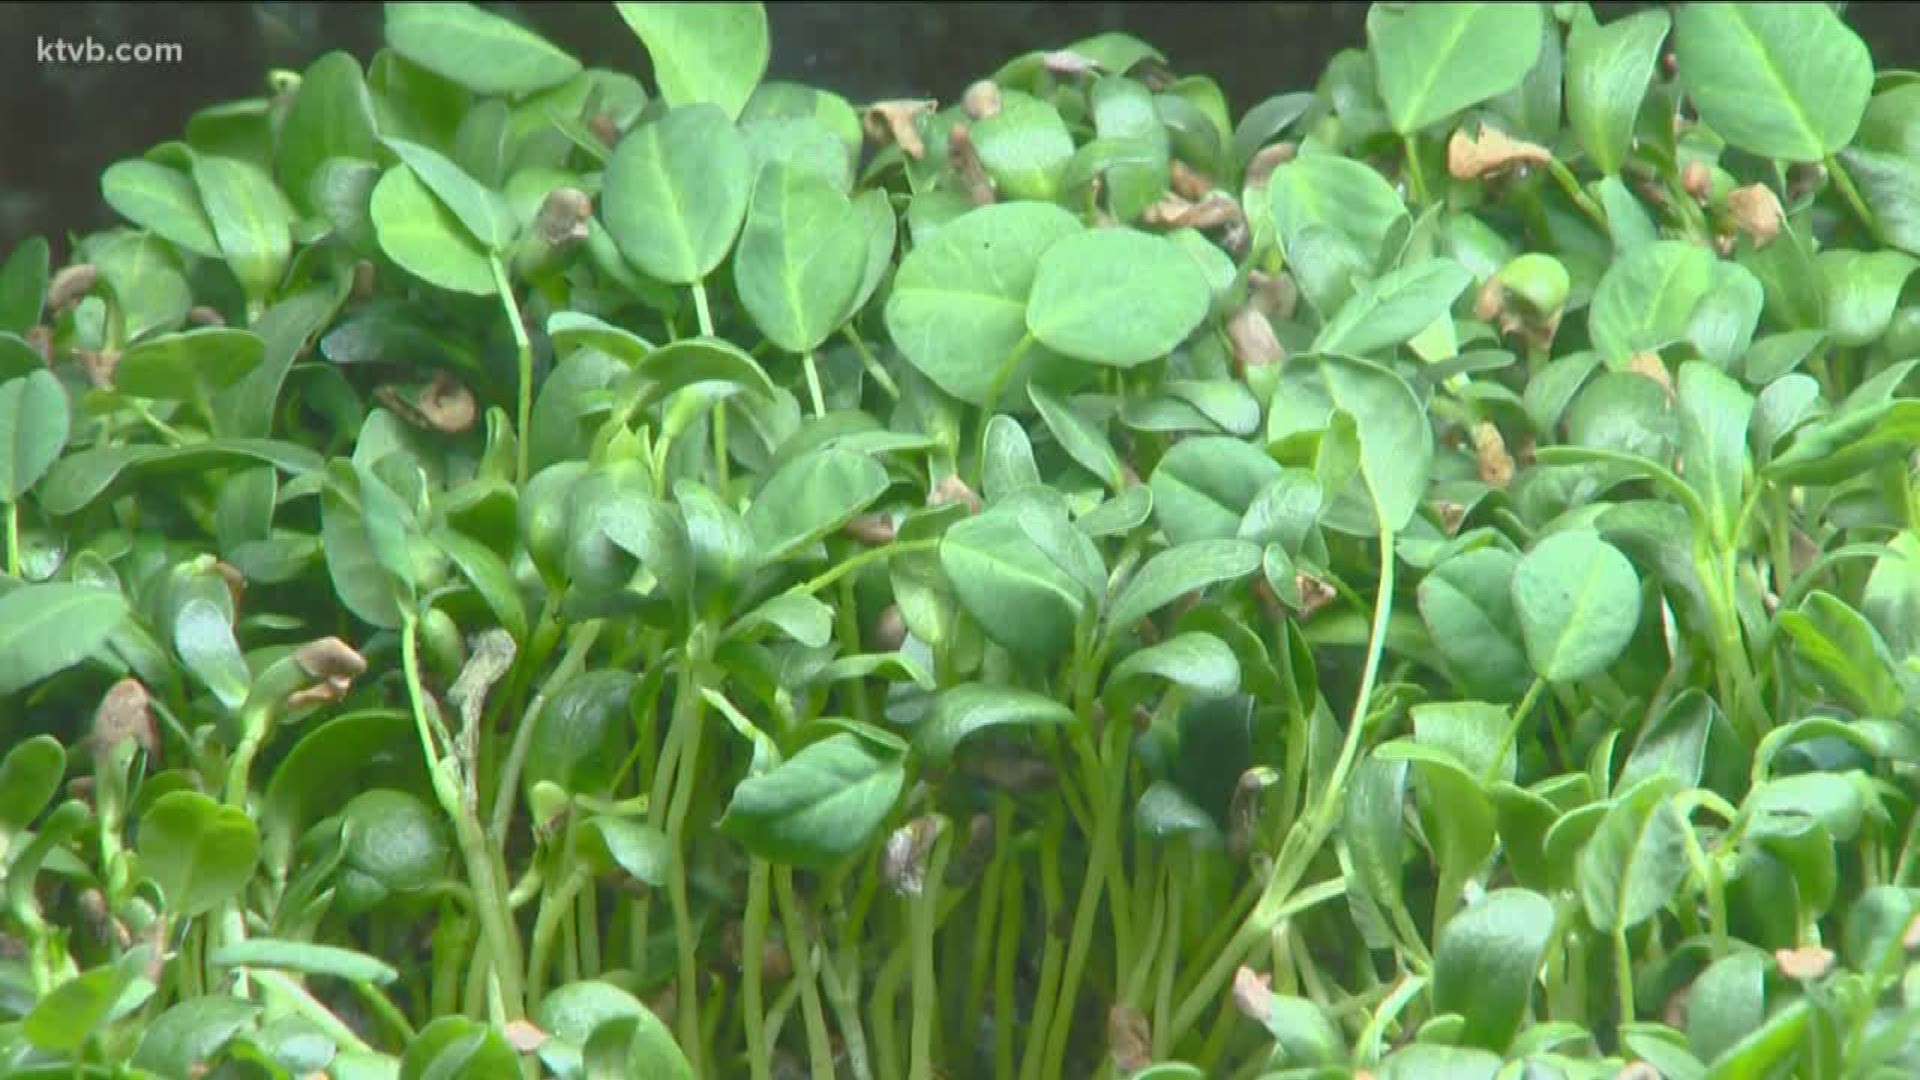 Garden master Jim Duthie says us how to grow tasty, nutritious greens inside.